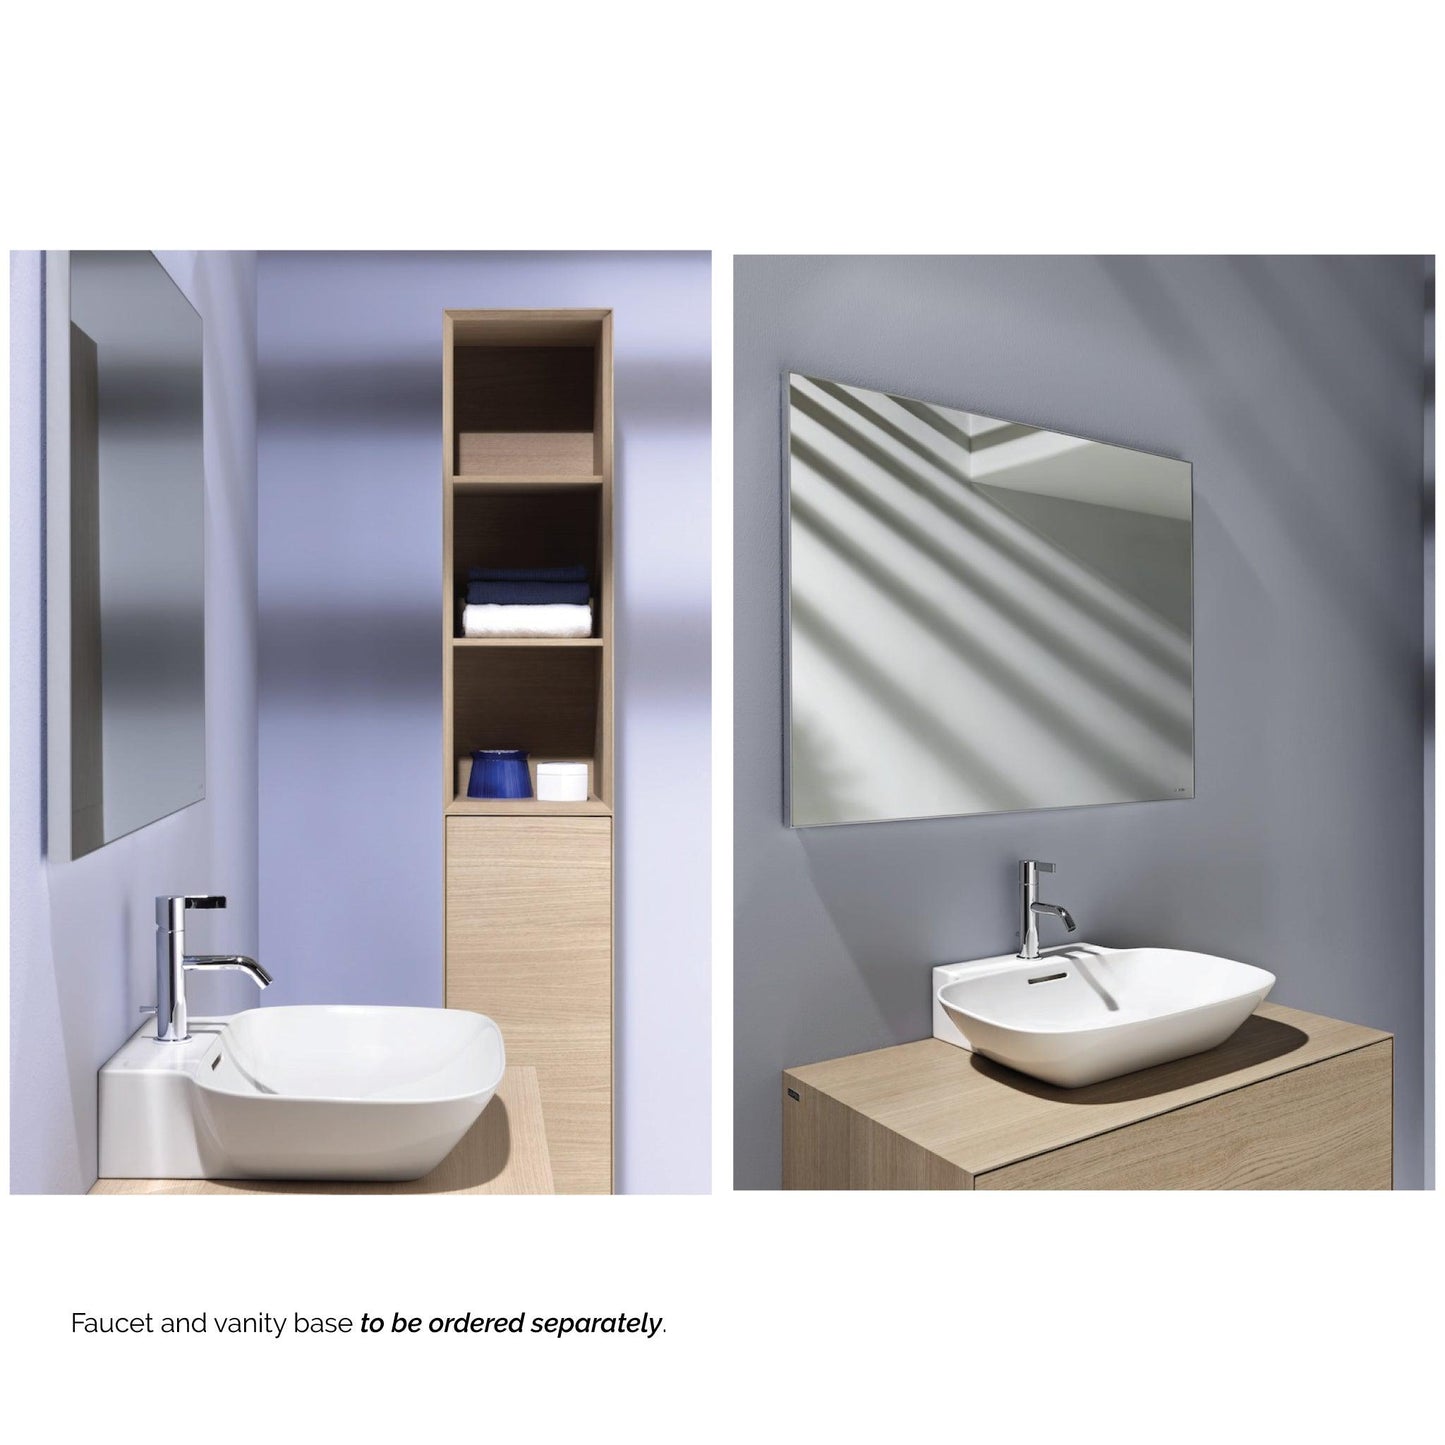 Laufen Ino 22" x 18" Rectangular Matte White Wall-Mounted Bathroom Sink With Faucet Hole